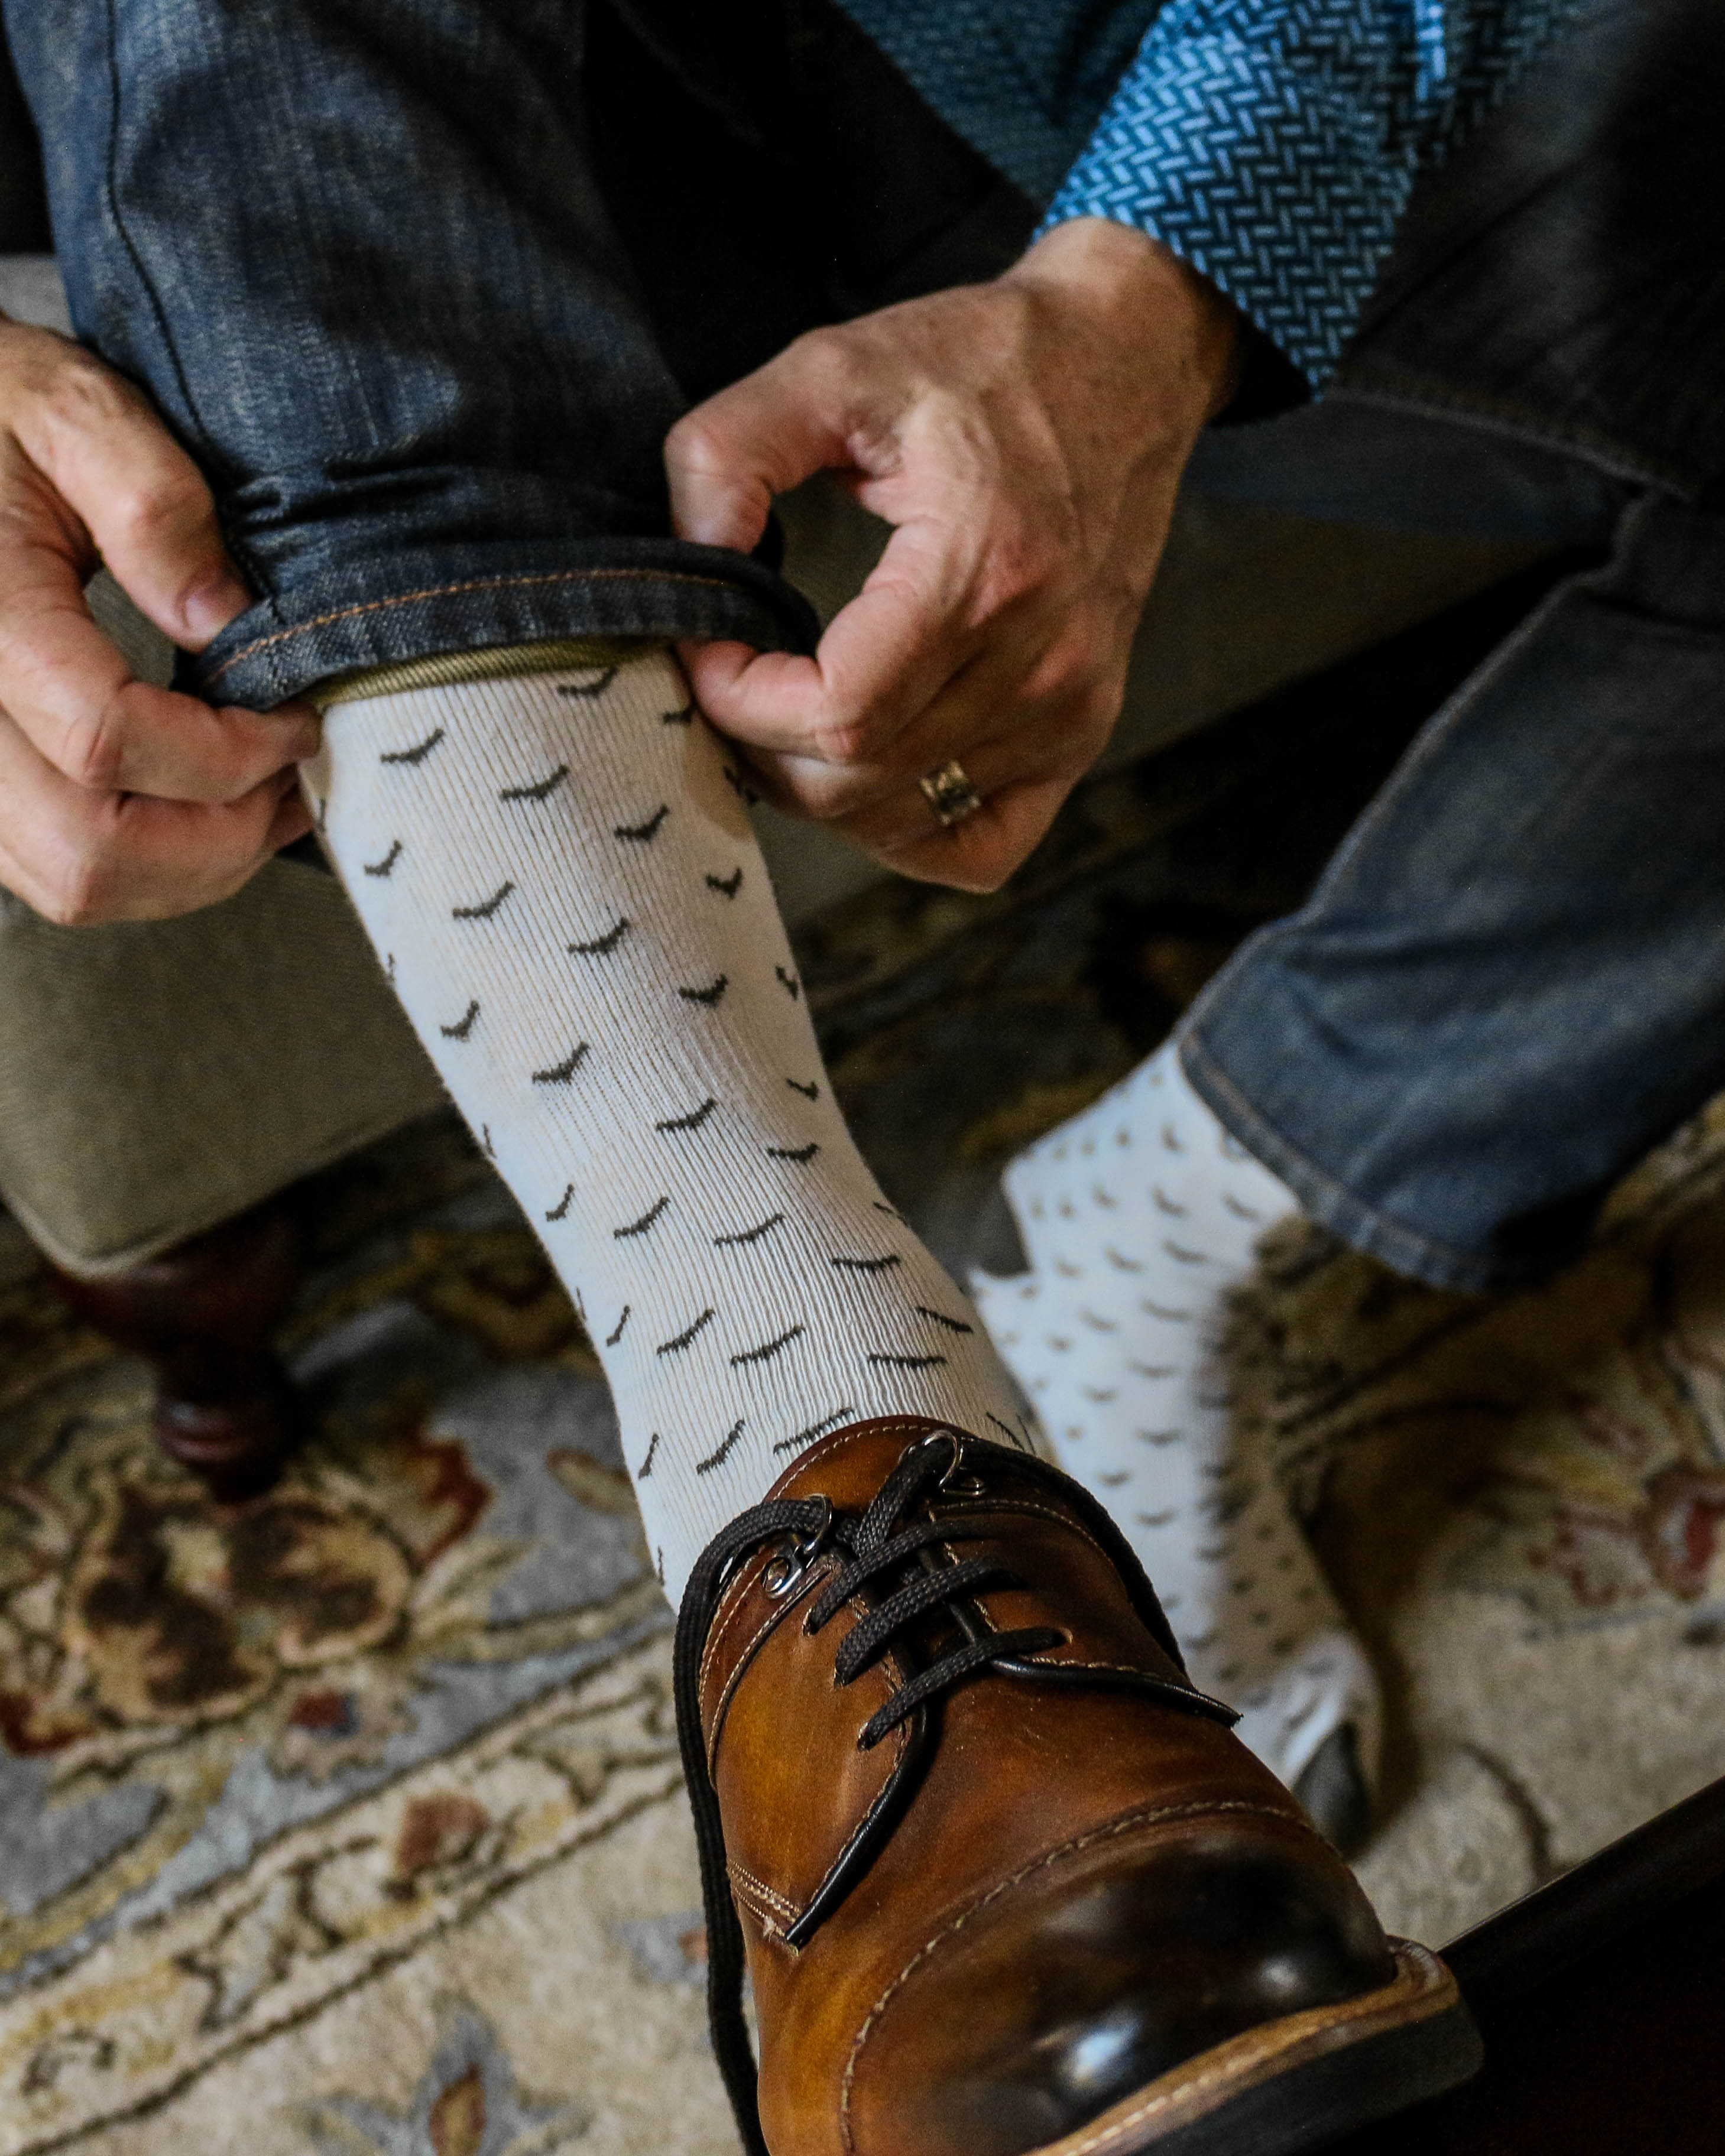 white over the calf dress socks with black print, brown dress shoes with black laces, blue jeans, blue dress shirt